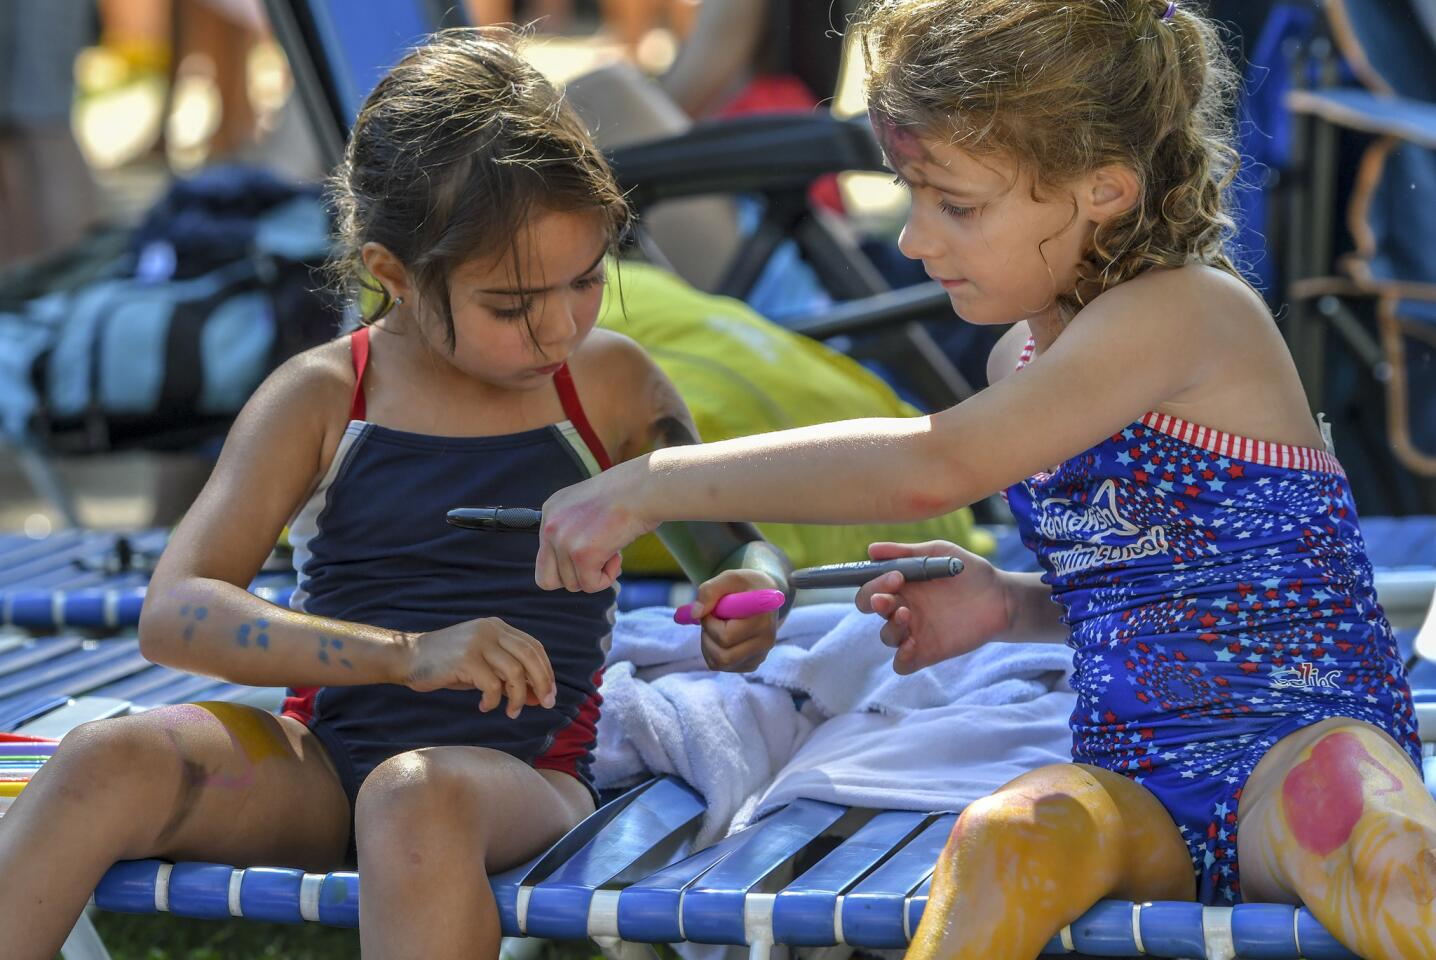 Harper Choice swimmers Ava Portz (L) and Caroline Tiplitz exchange markers as they color themselves during a break at the Columbia Neighborhood Swim League meet between host Clemens Crossing and Harper's Choice Saturday morning in Columbia.